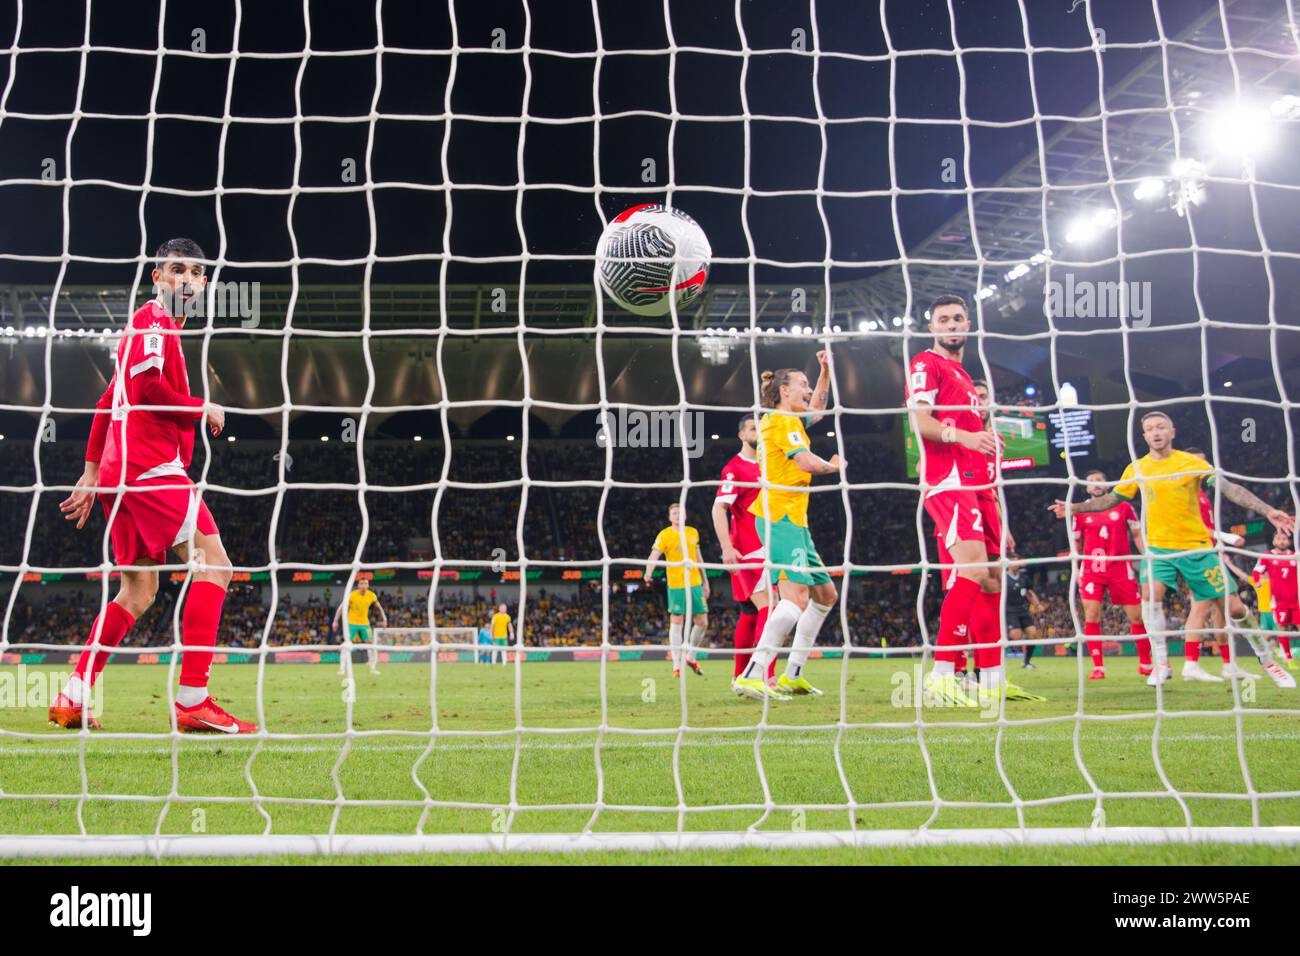 Sydney, Australia. 21st Mar, 2024. A goal is scored by Kyle Rowles of Australia as Lebanese players look on during the FIFA World Cup 2026 Qualifier match between Australia and Lebanon at Western Sydney Stadium on March 21, 2024 in Sydney, Australia Credit: IOIO IMAGES/Alamy Live News Stock Photo